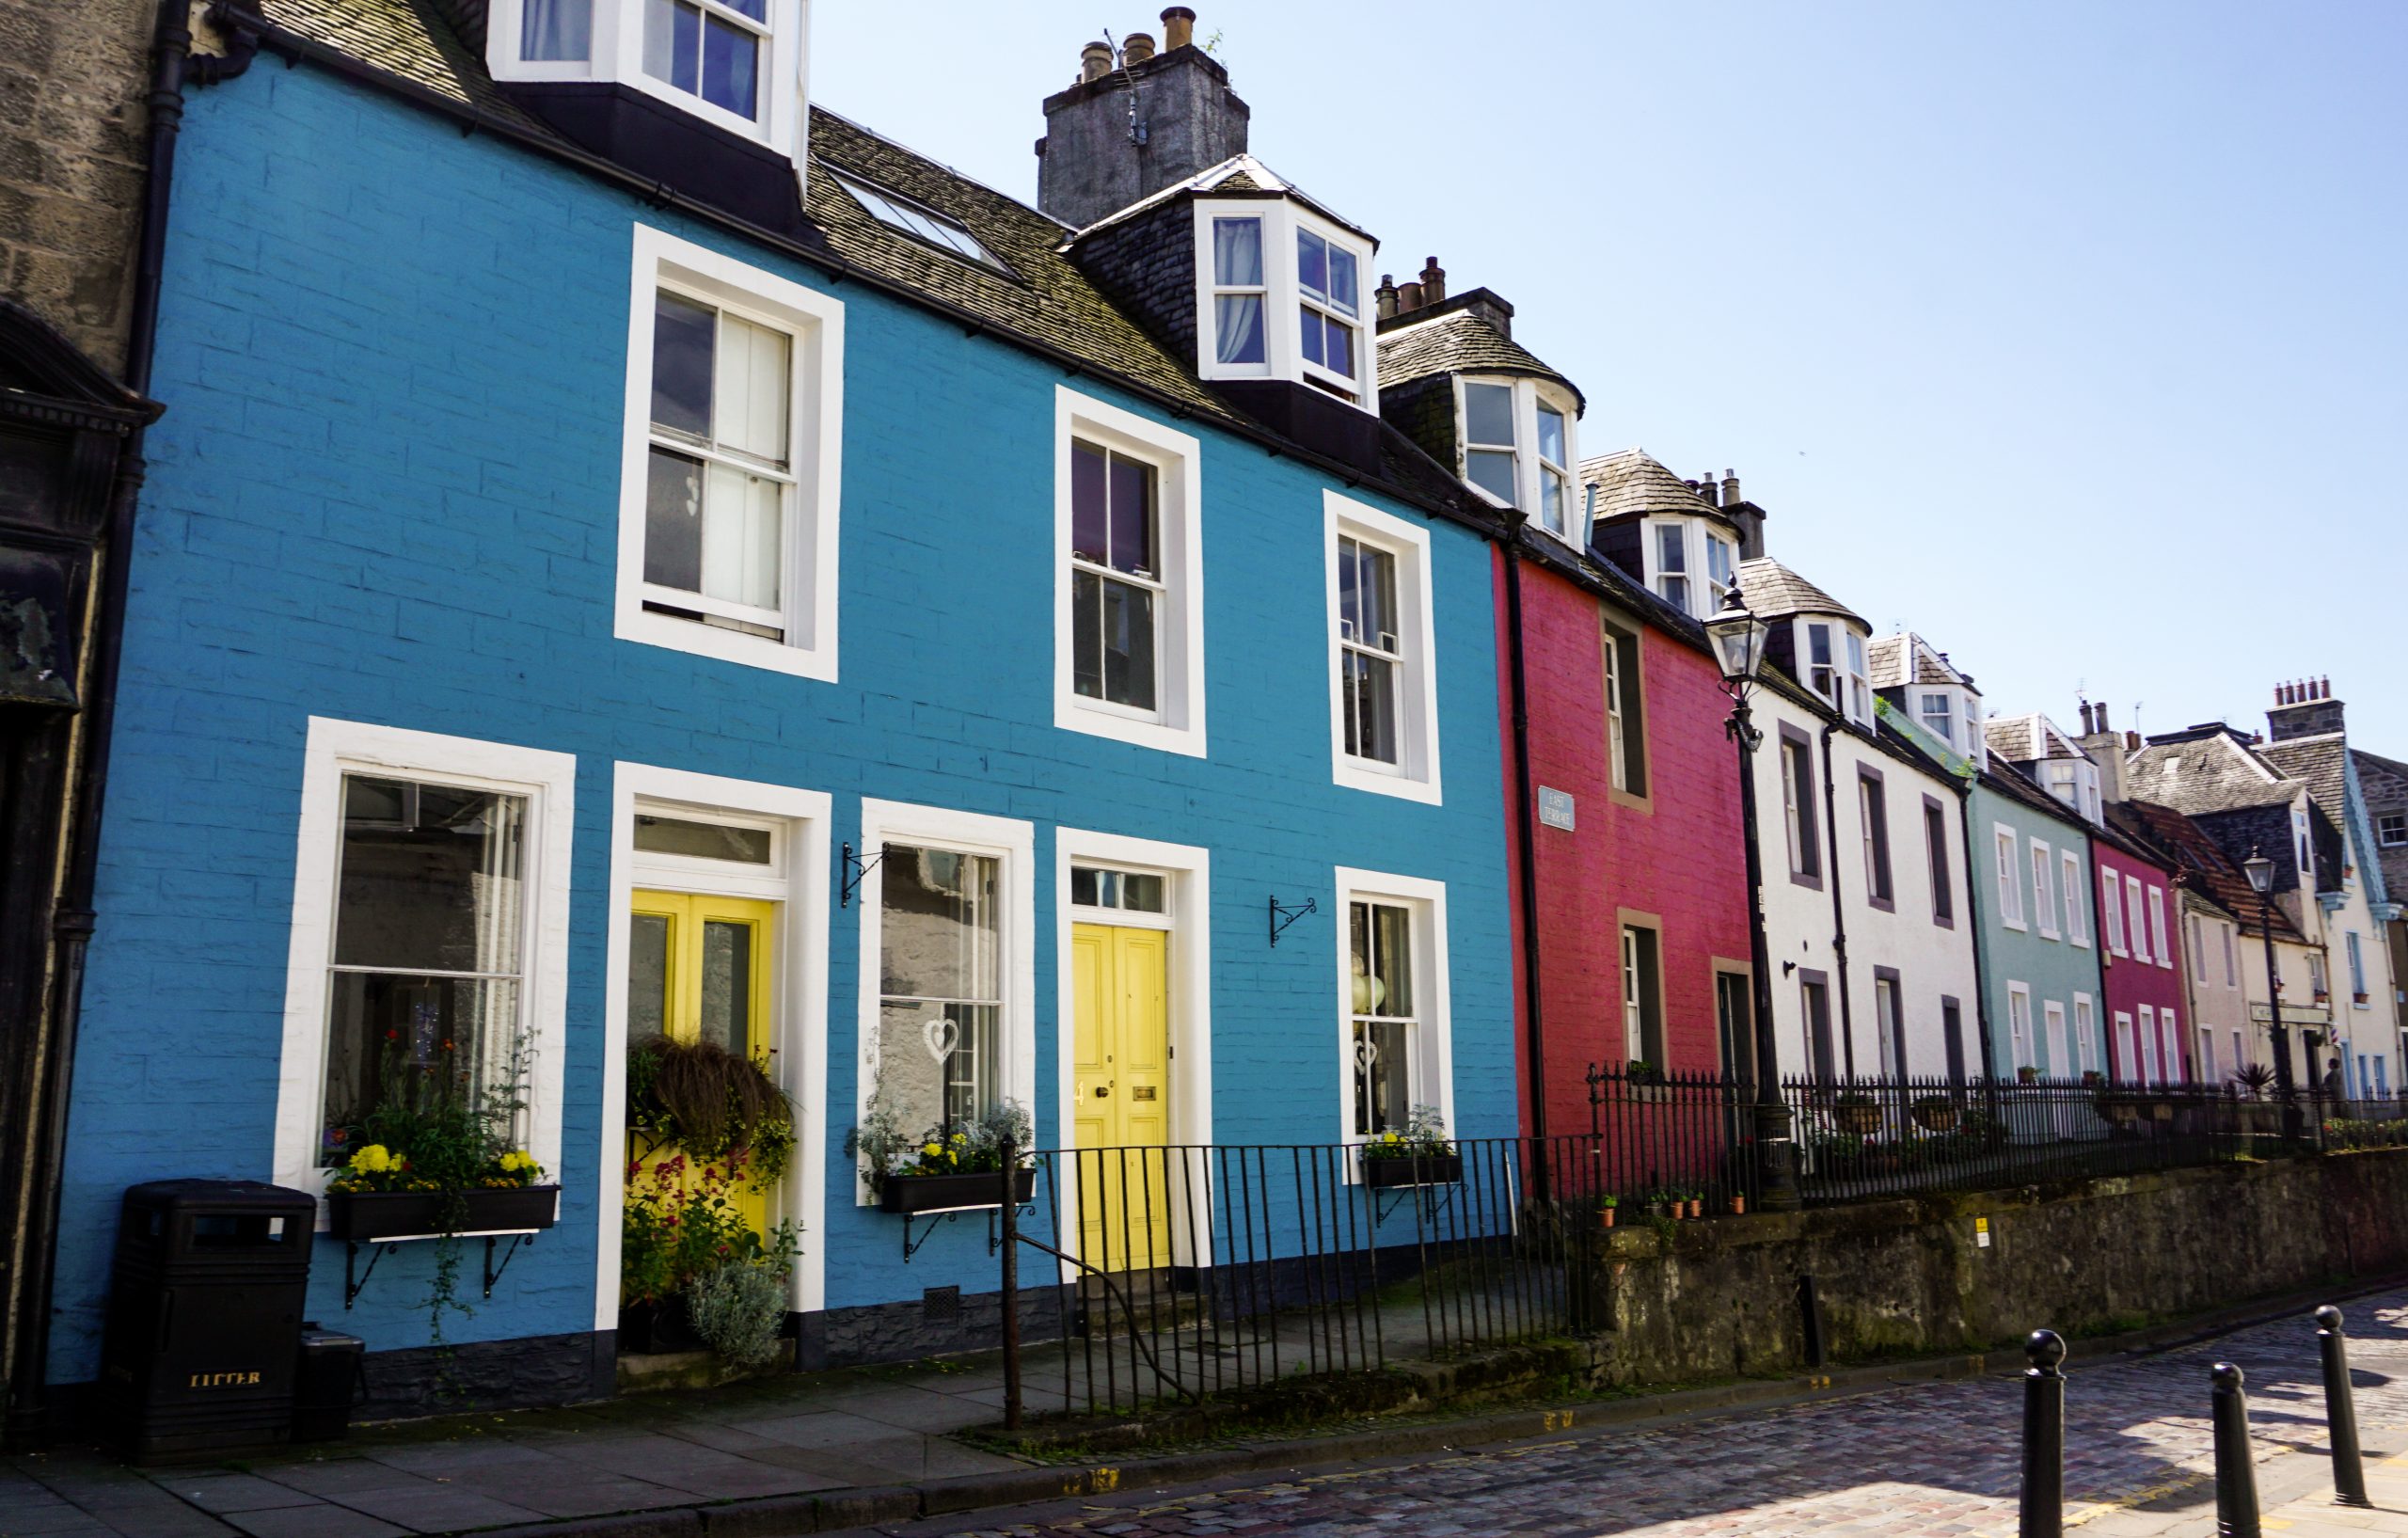 Colourful homes in Queensferry